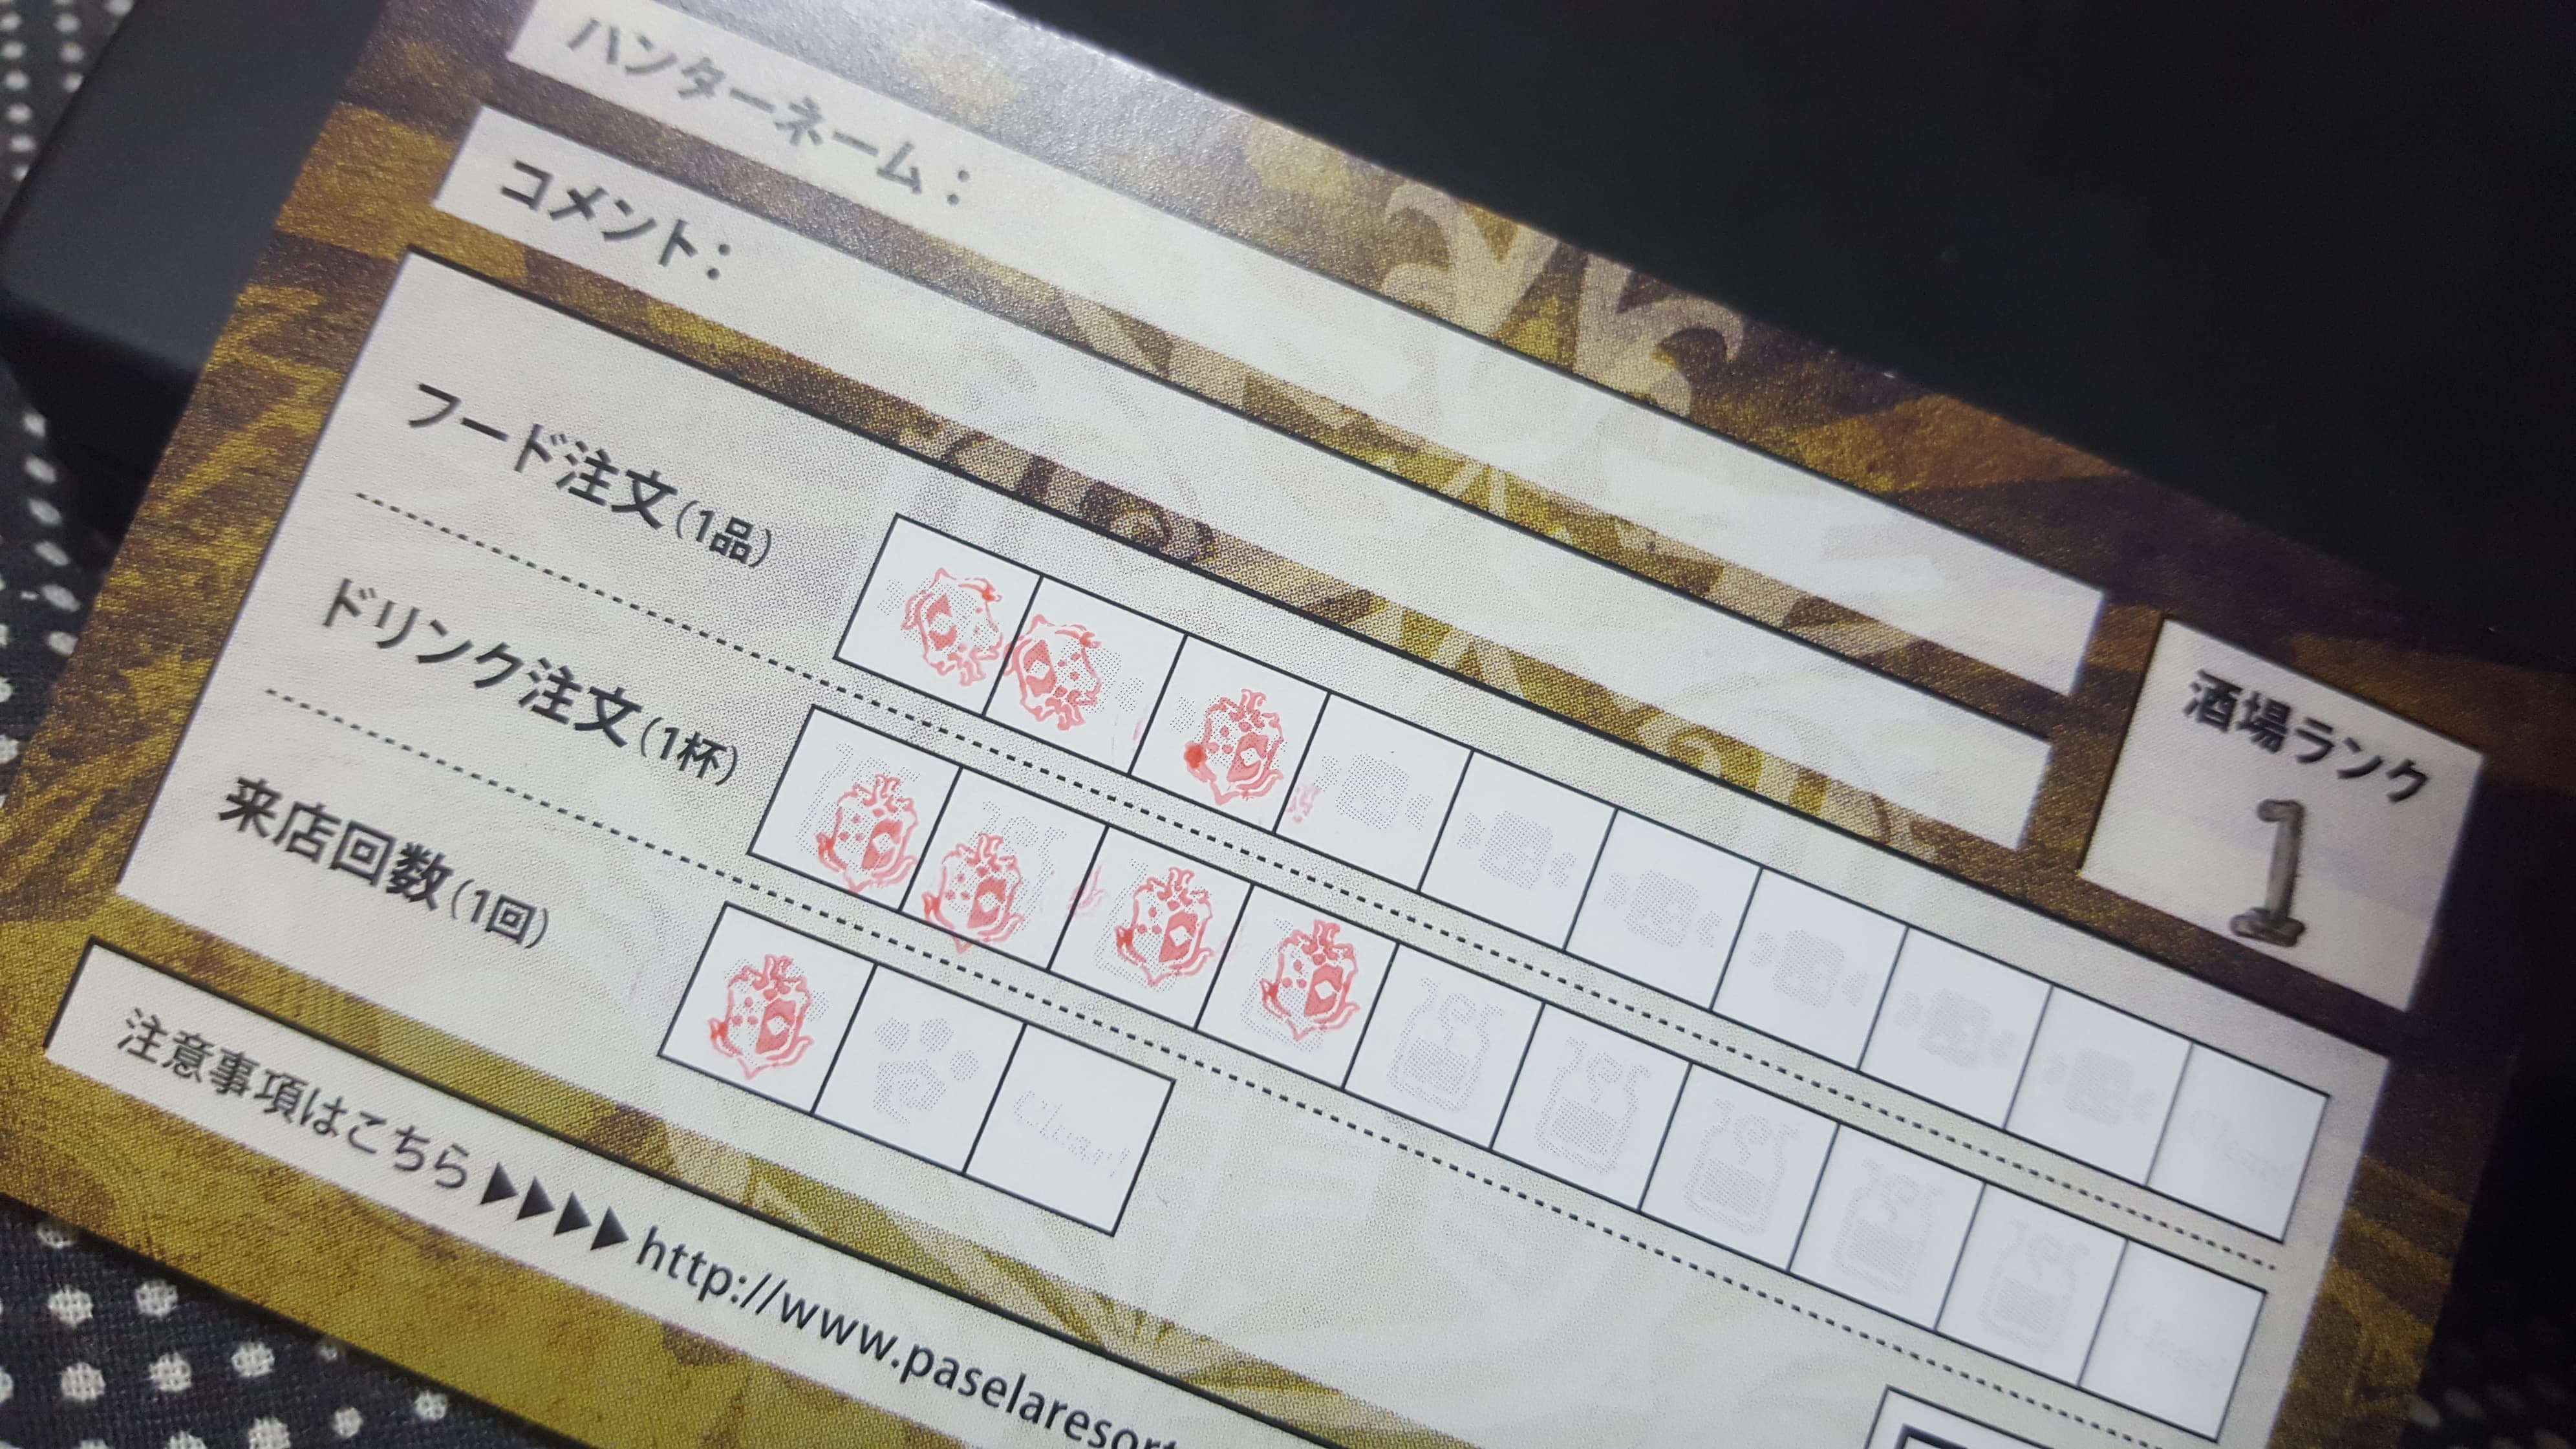 We got stamps on our Guild Cards!